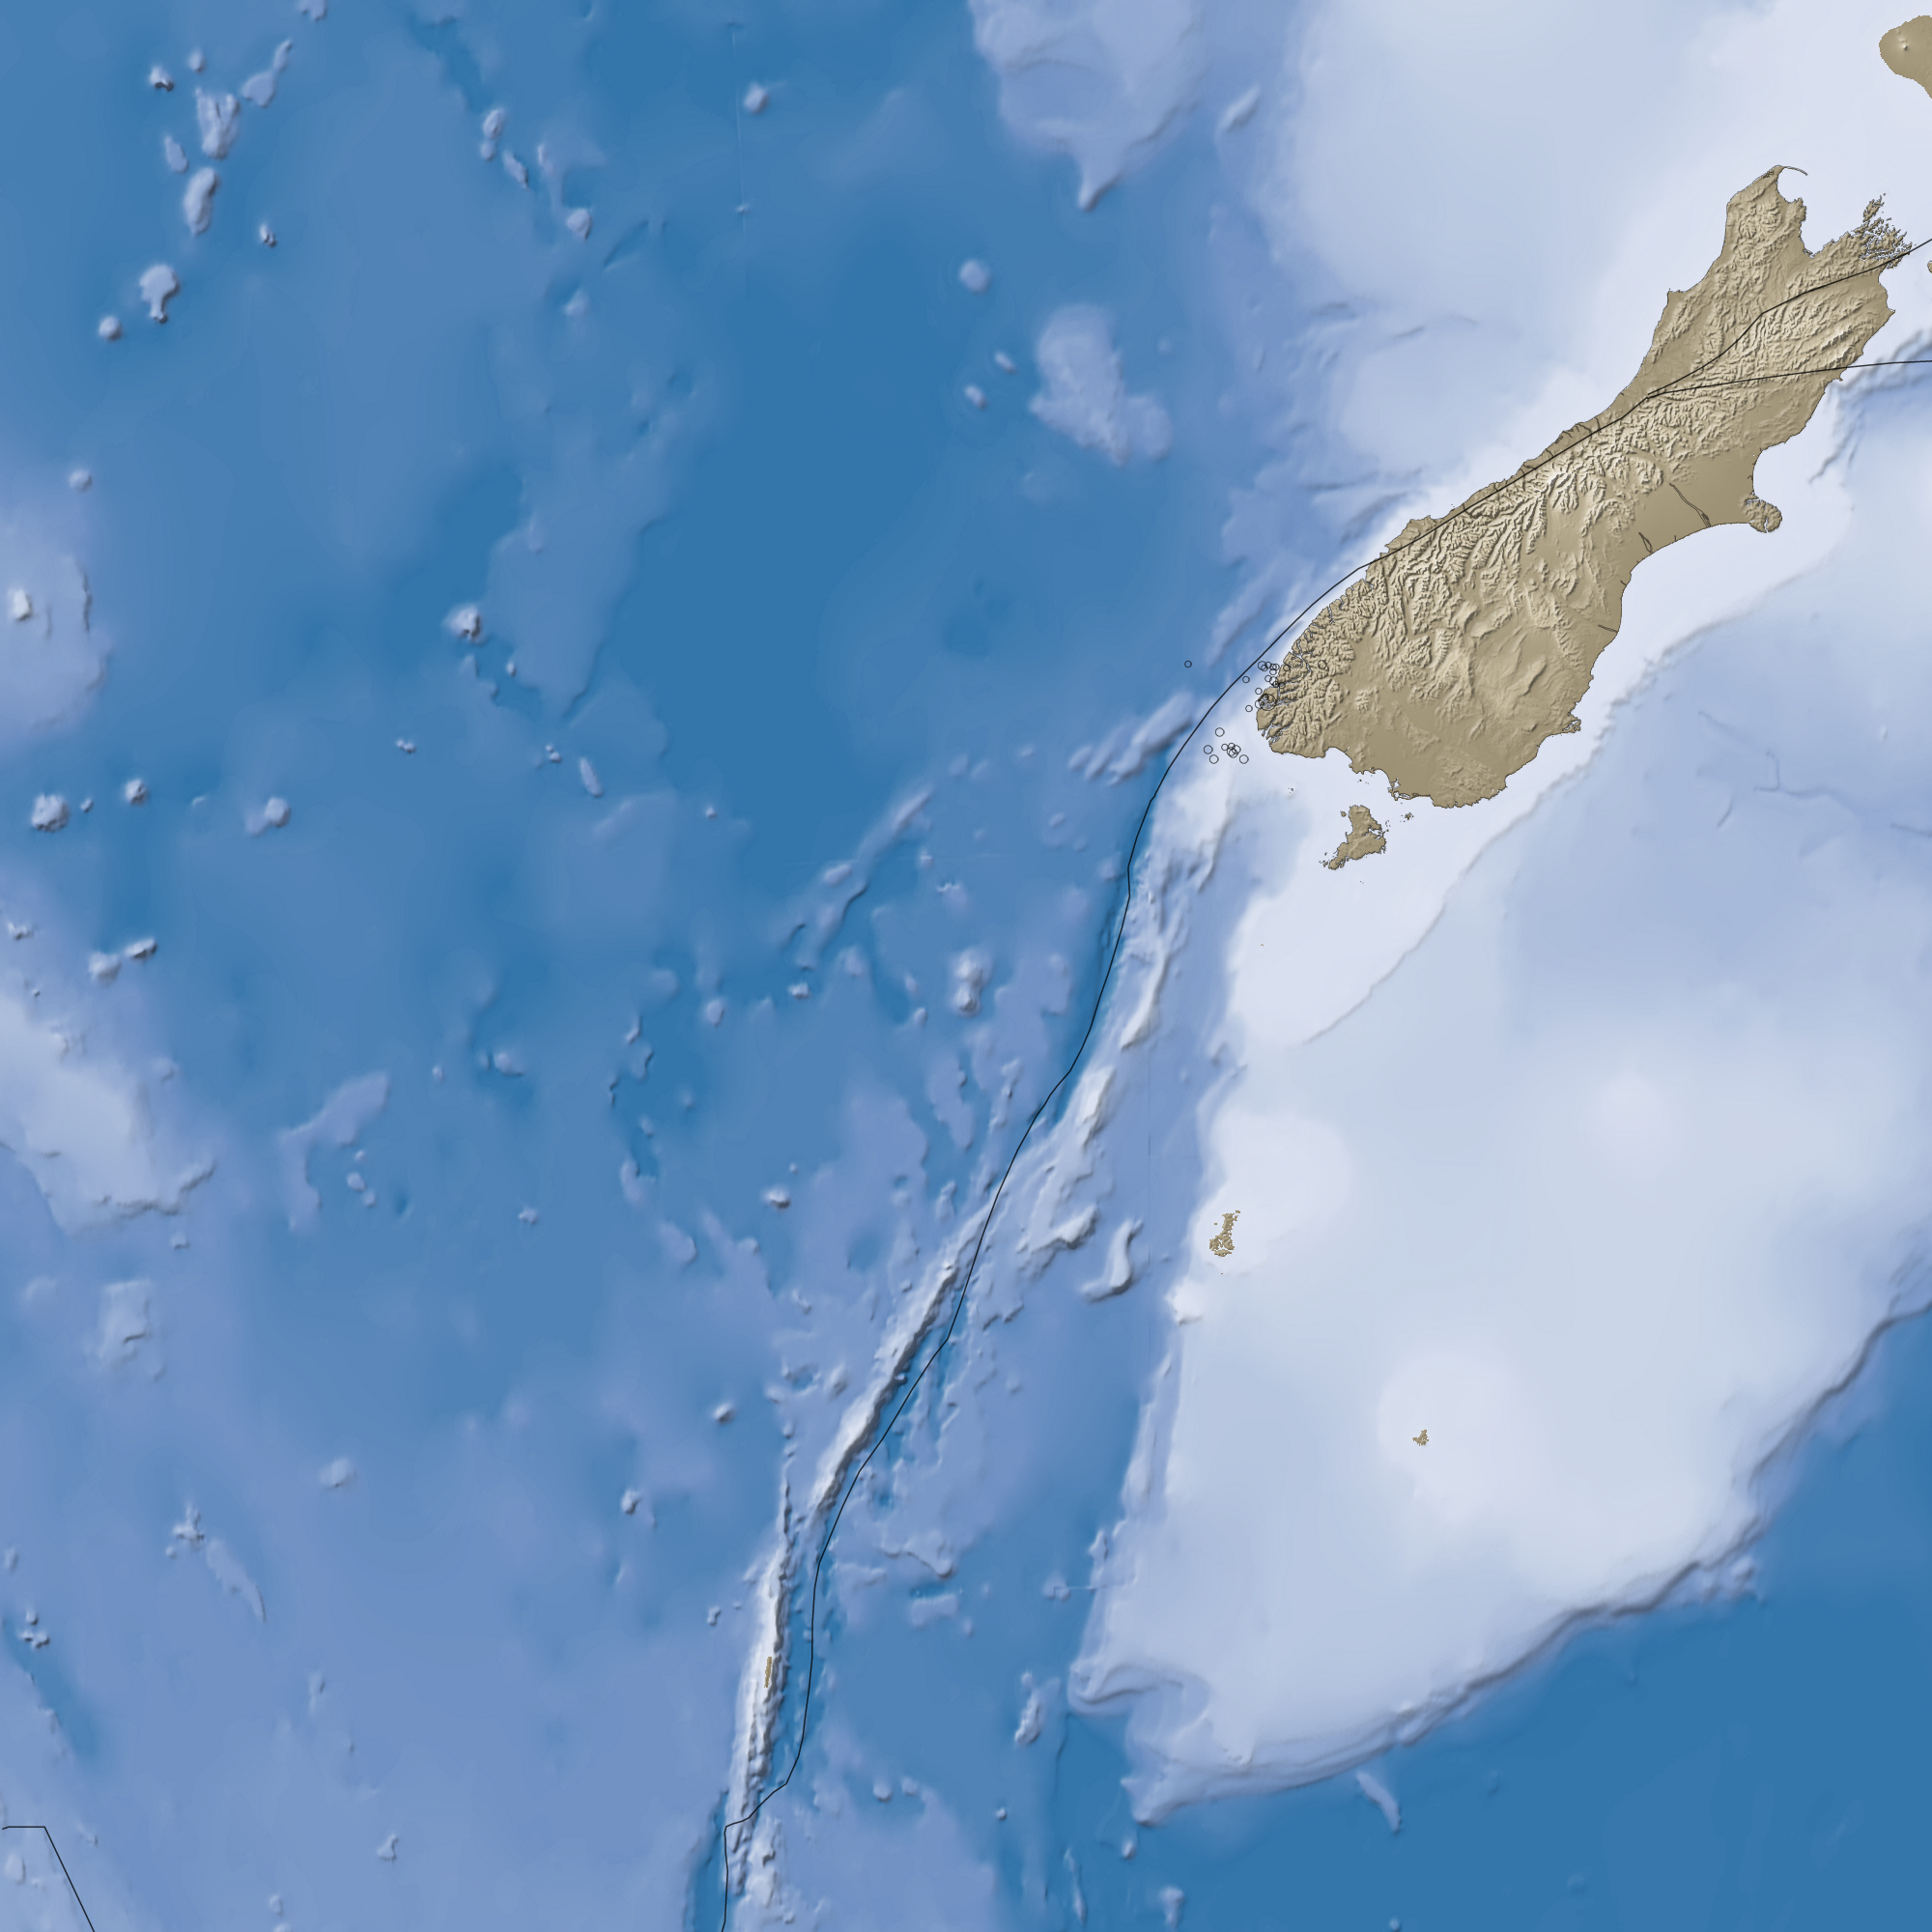 7.6 Magnitude Earthquake off New Zealand’s South Island - related image preview